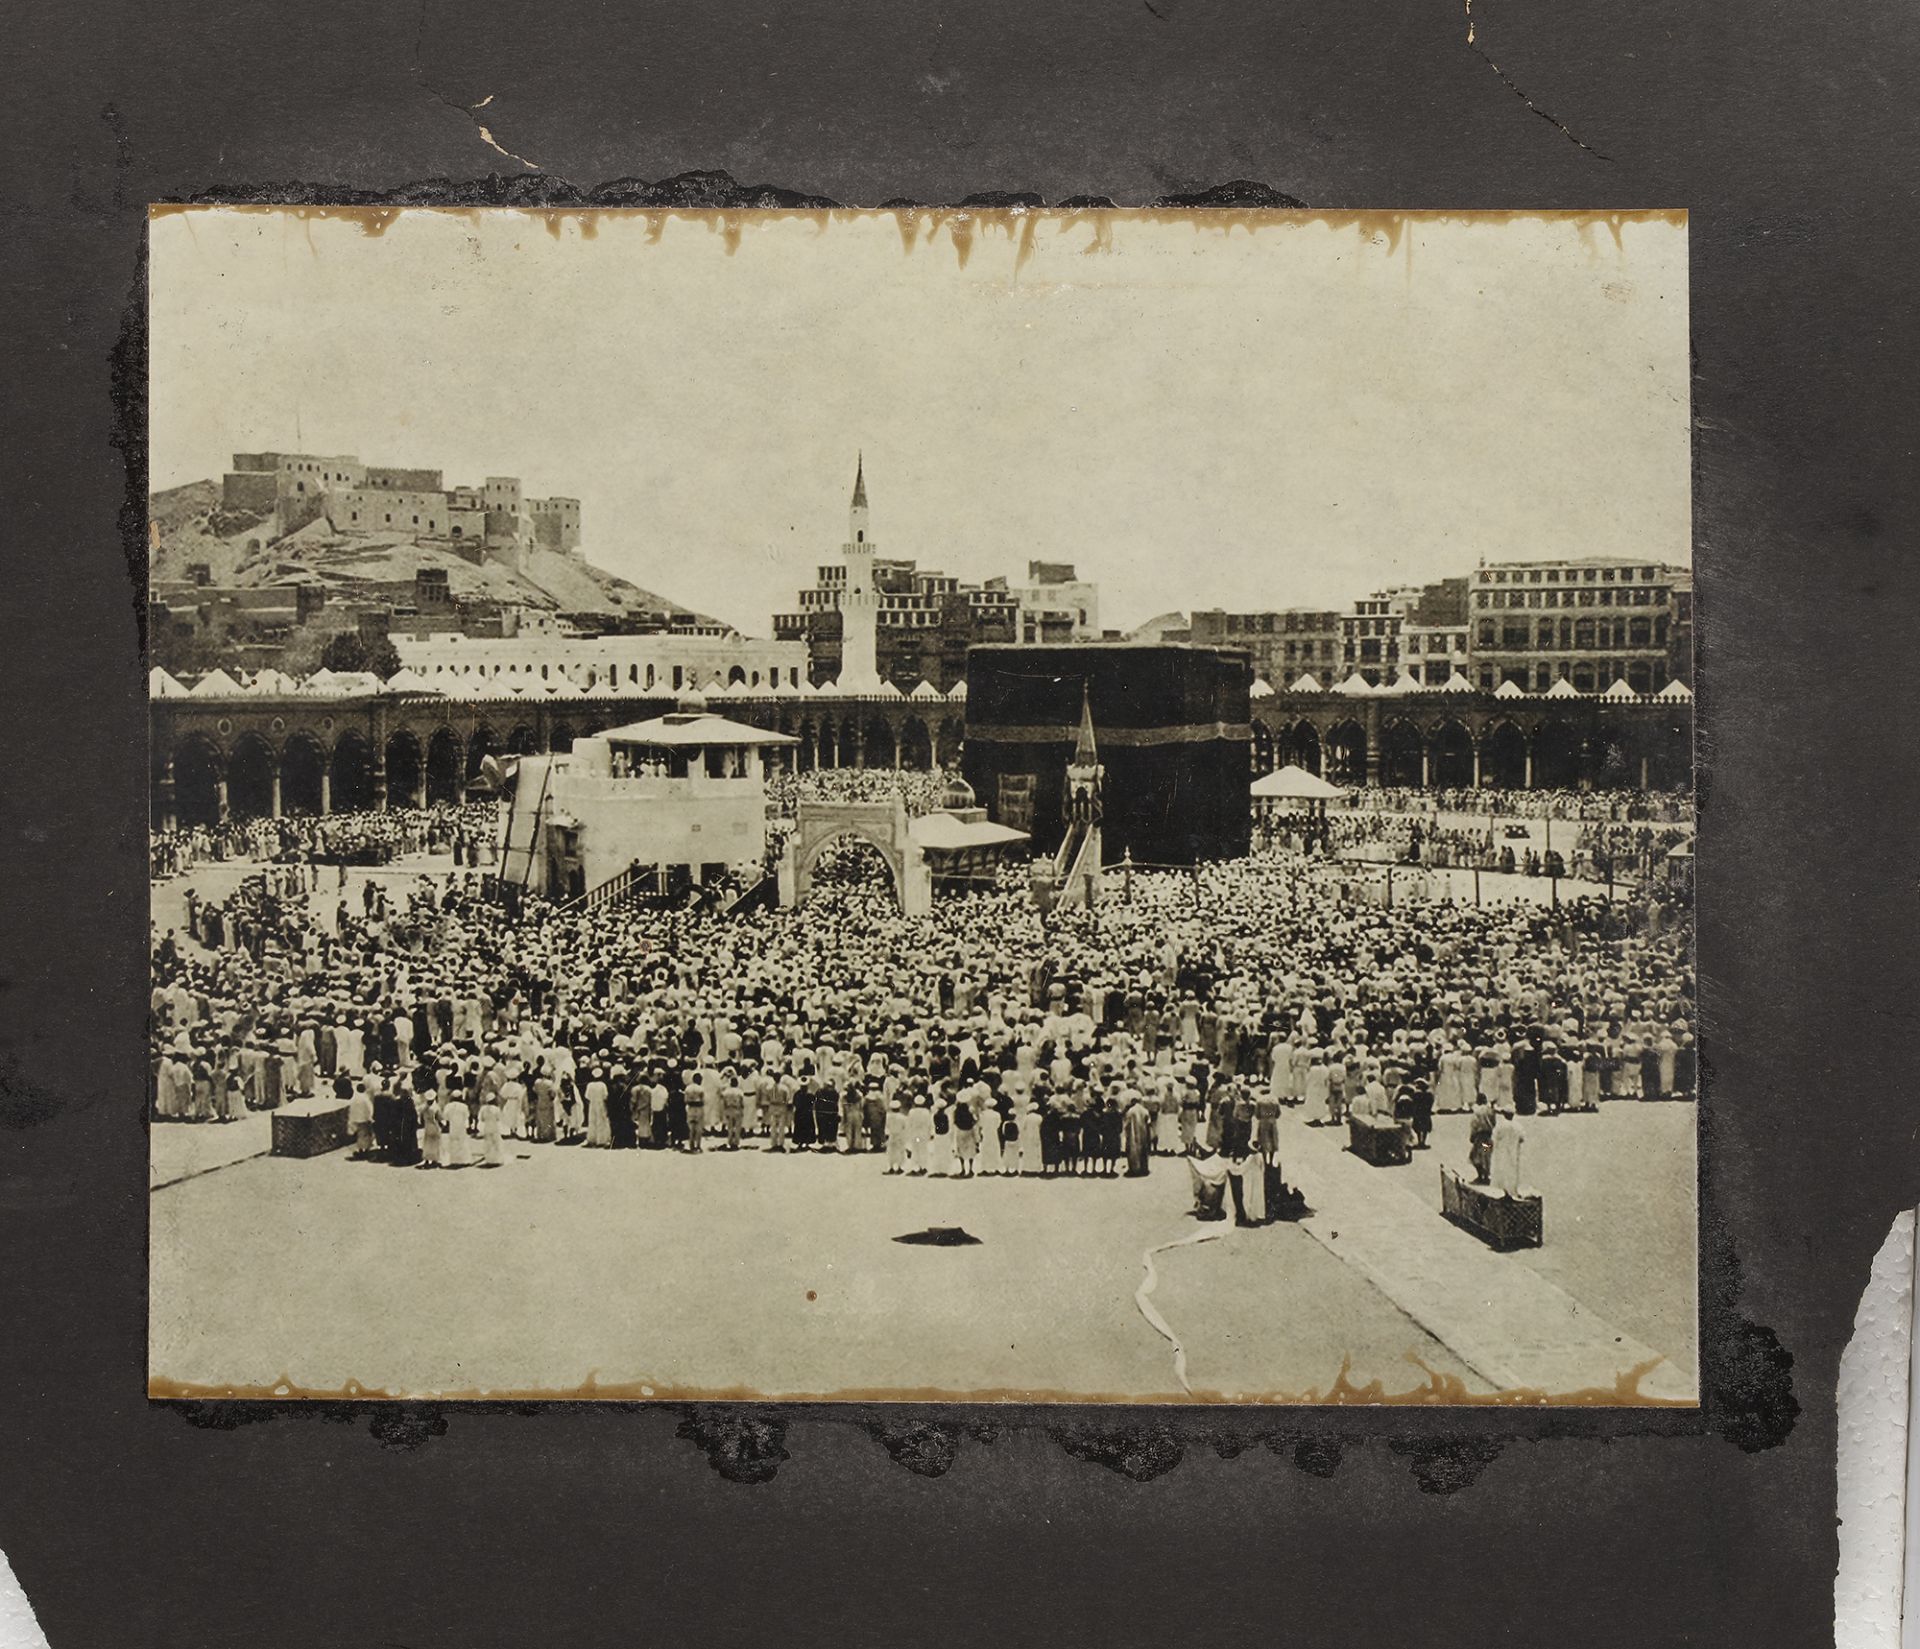 MECCA AND MEDINA, A COLLECTION OF 14 PHOTOGRAPHS DURING THE HAJJ, EARLY 20TH CENTURY - Image 12 of 15